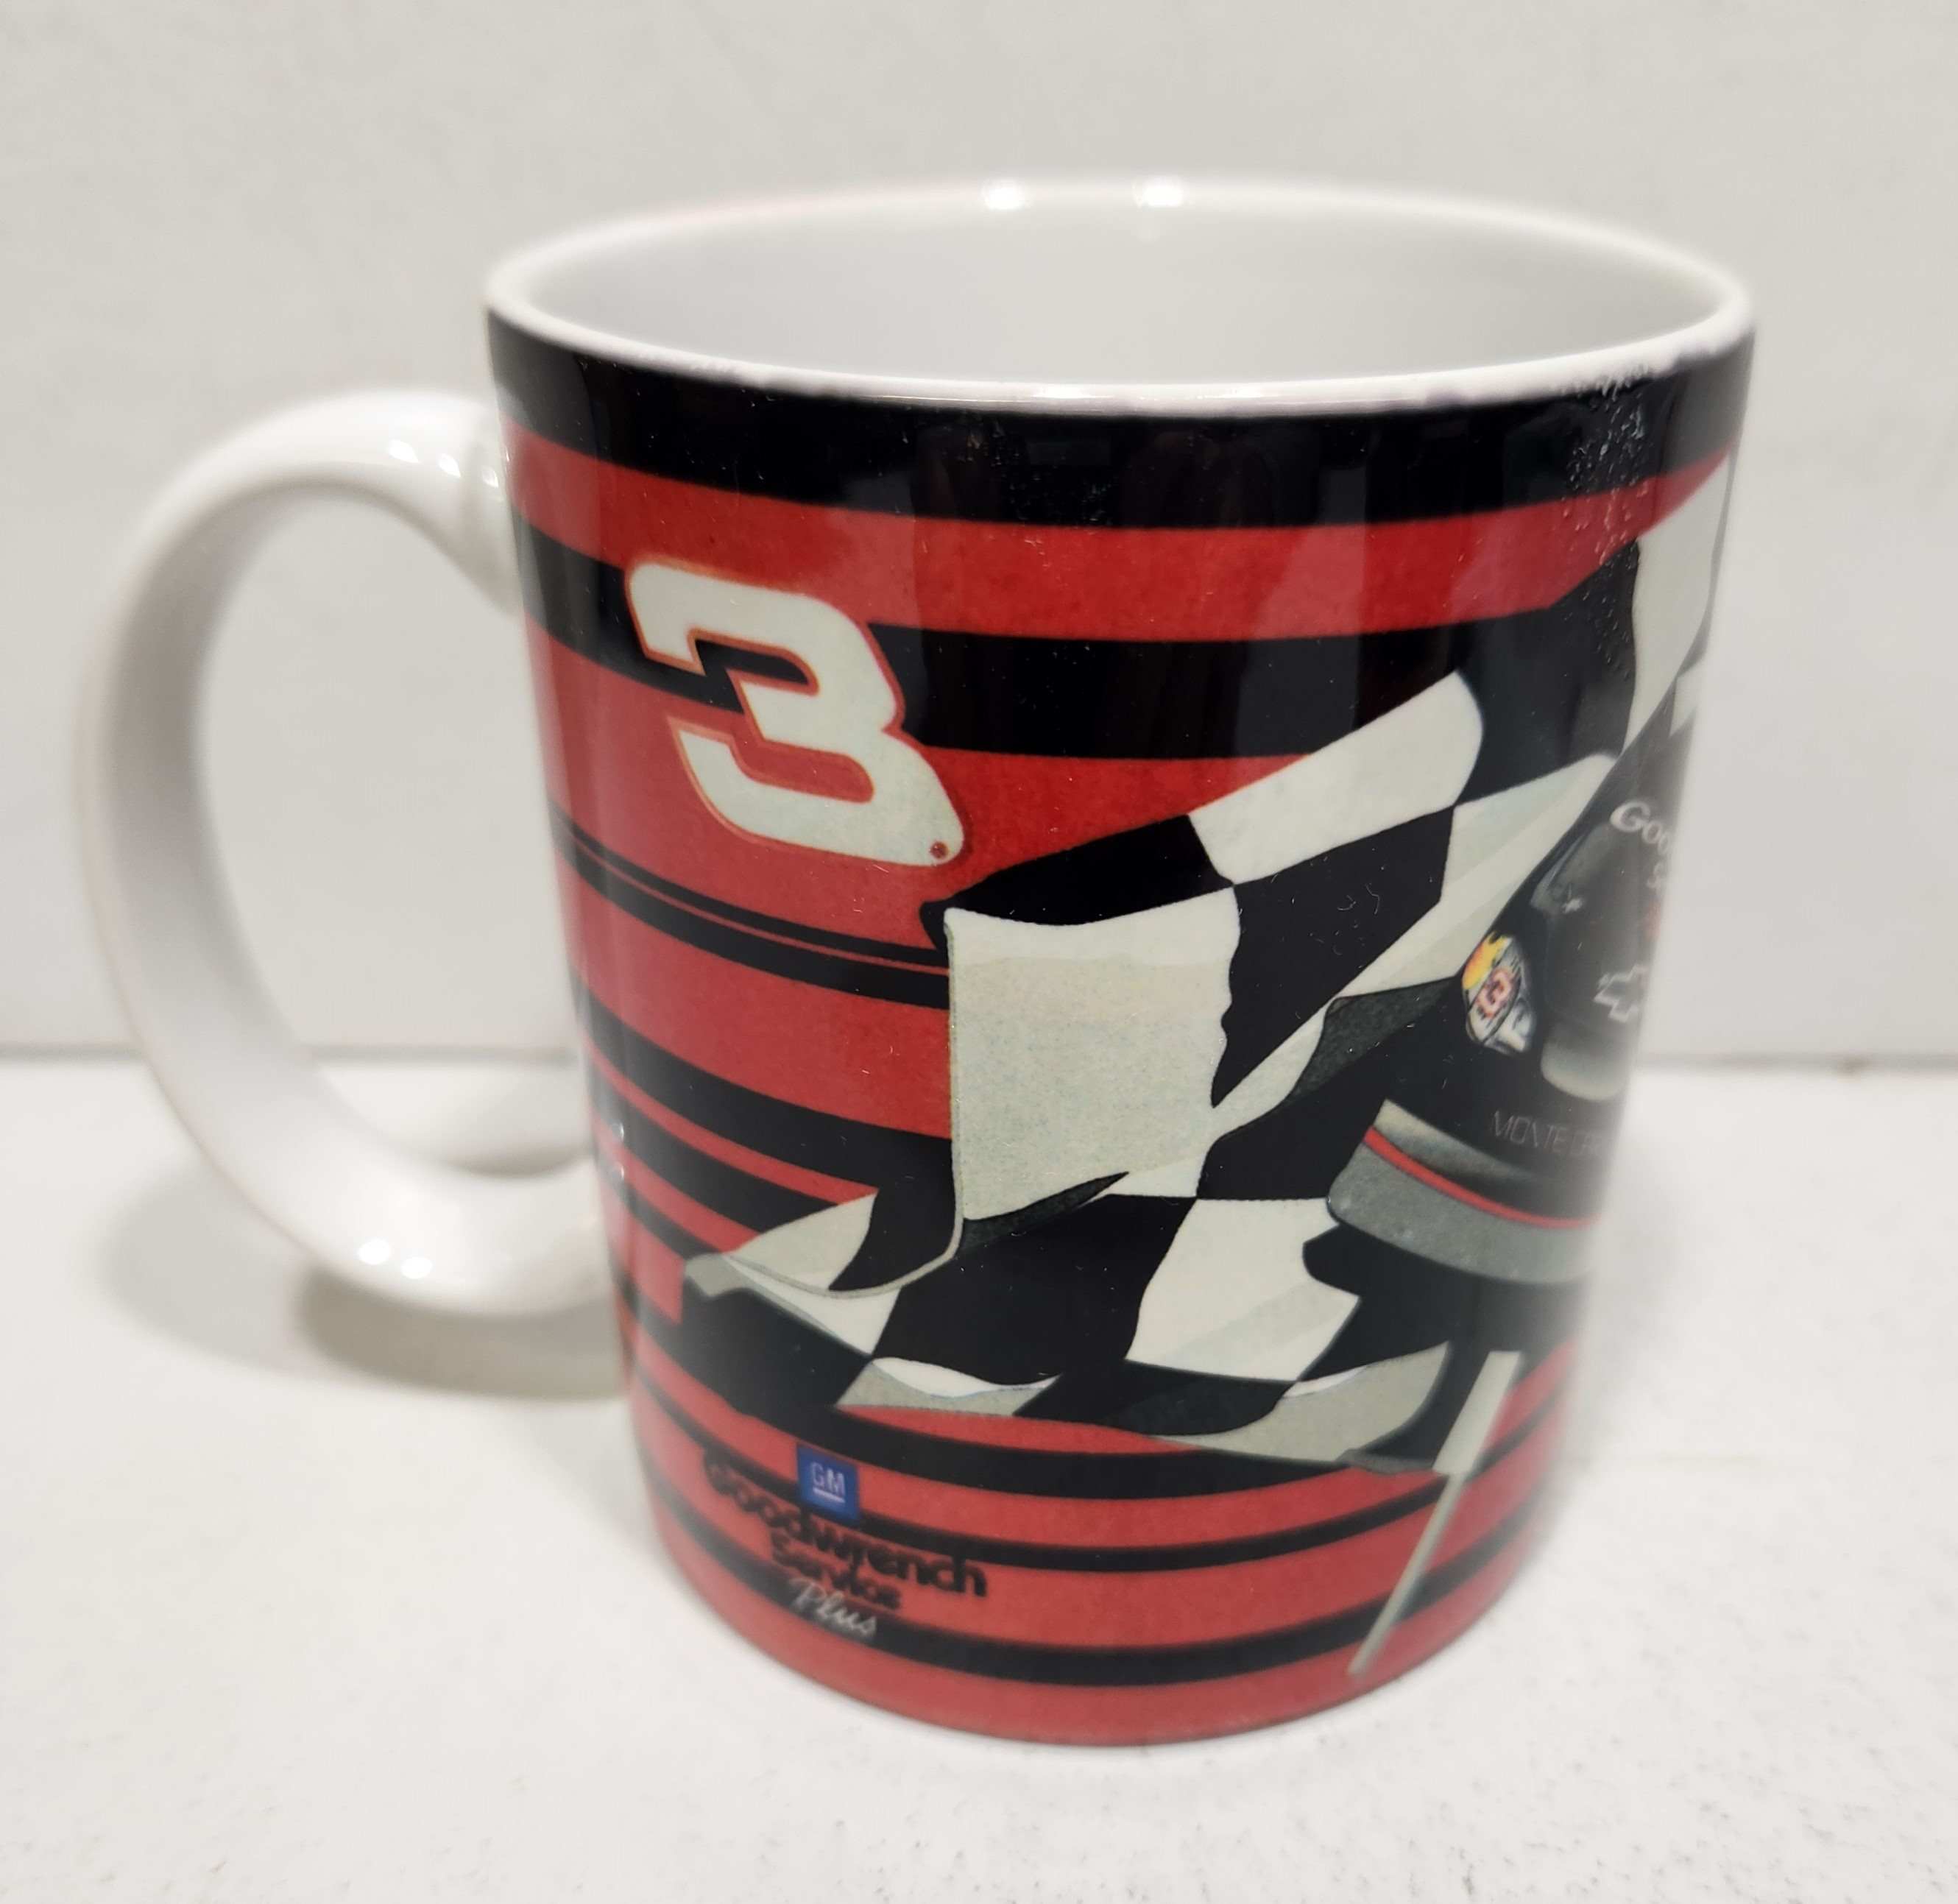 2001 Dale Earnhardt Goodwrench 11 oz. collectors mug